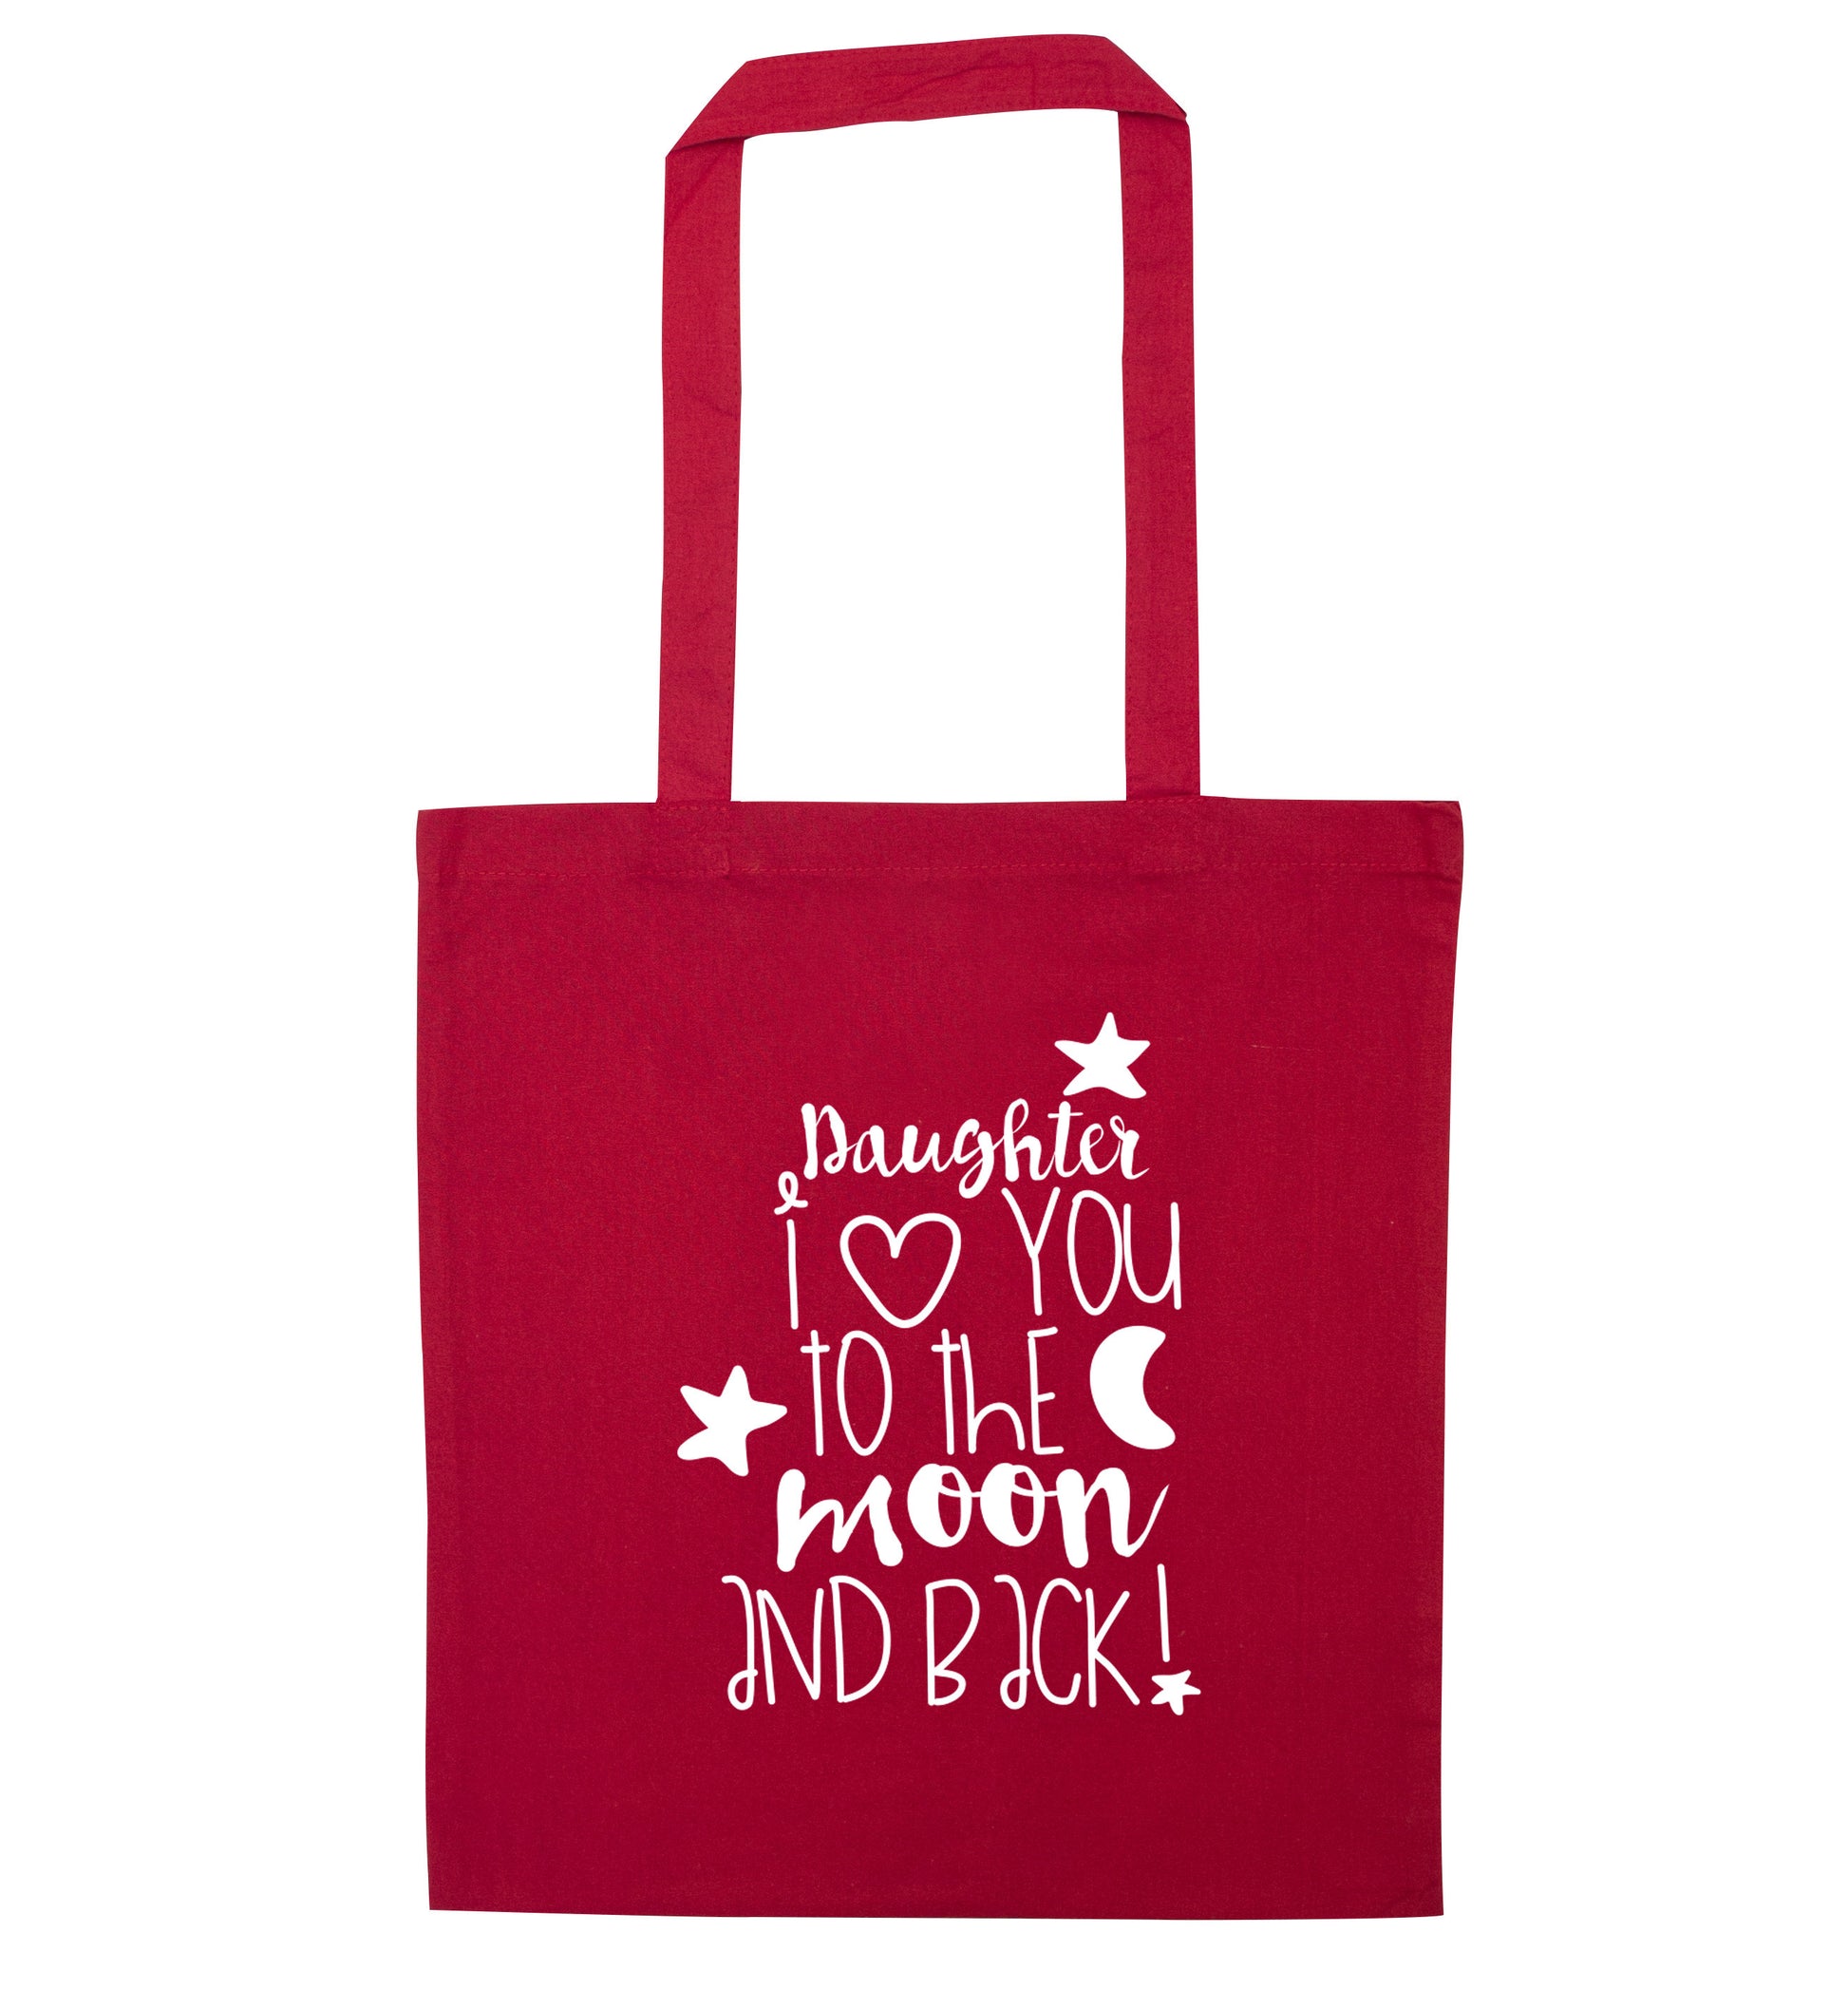 Daughter I love you to the moon and back red tote bag